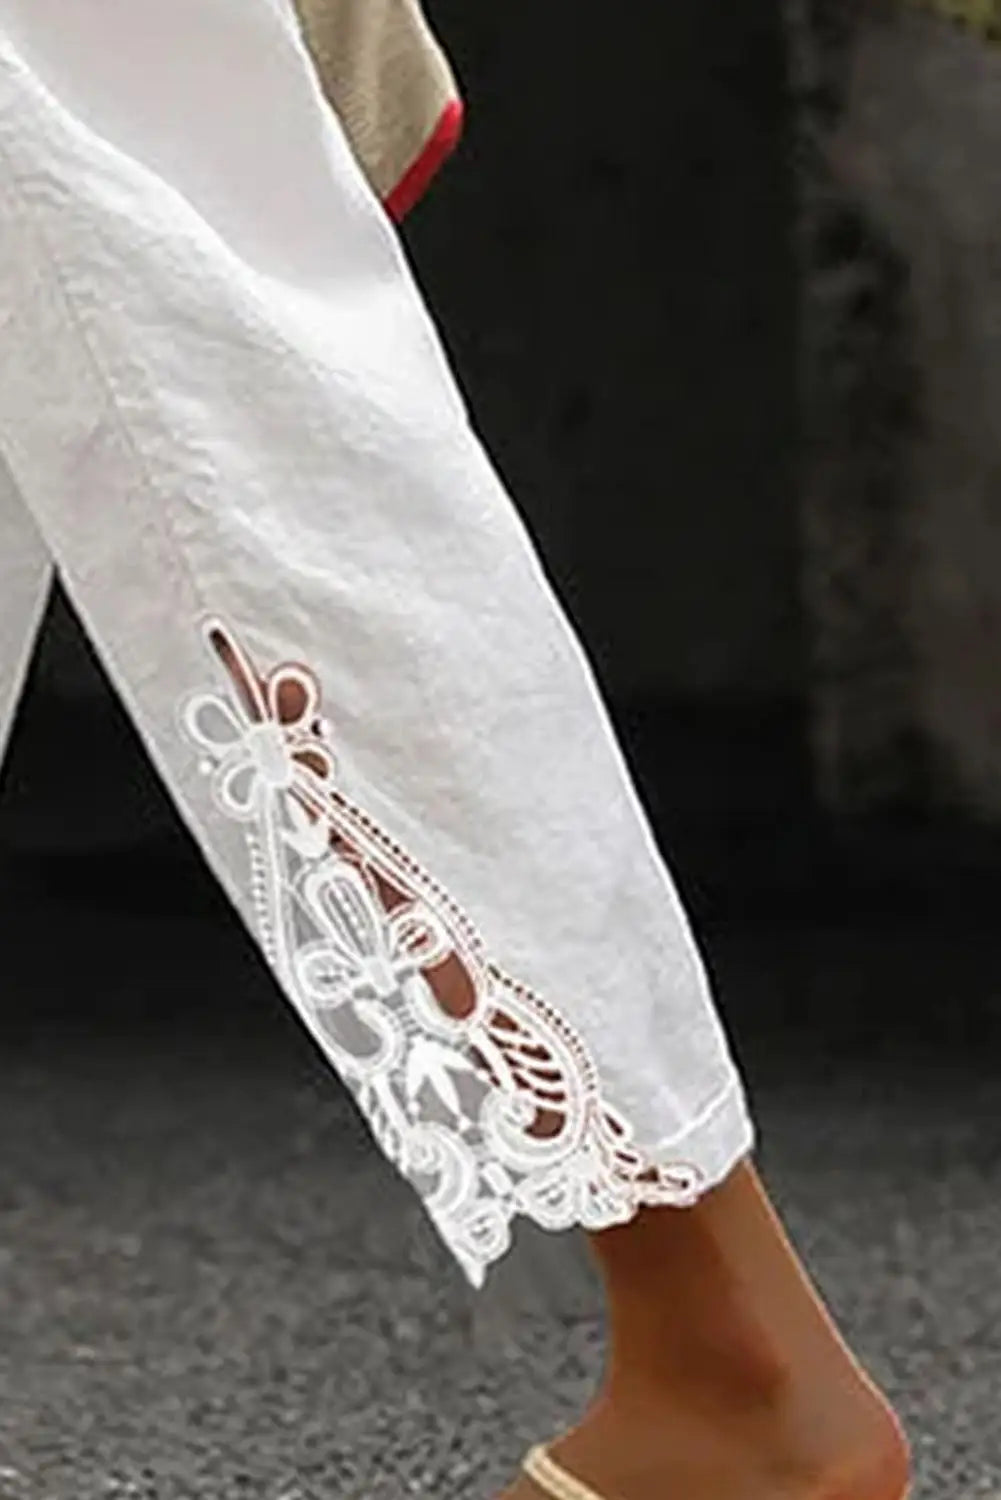 White lace splicing drawstring casual cotton pants - straight